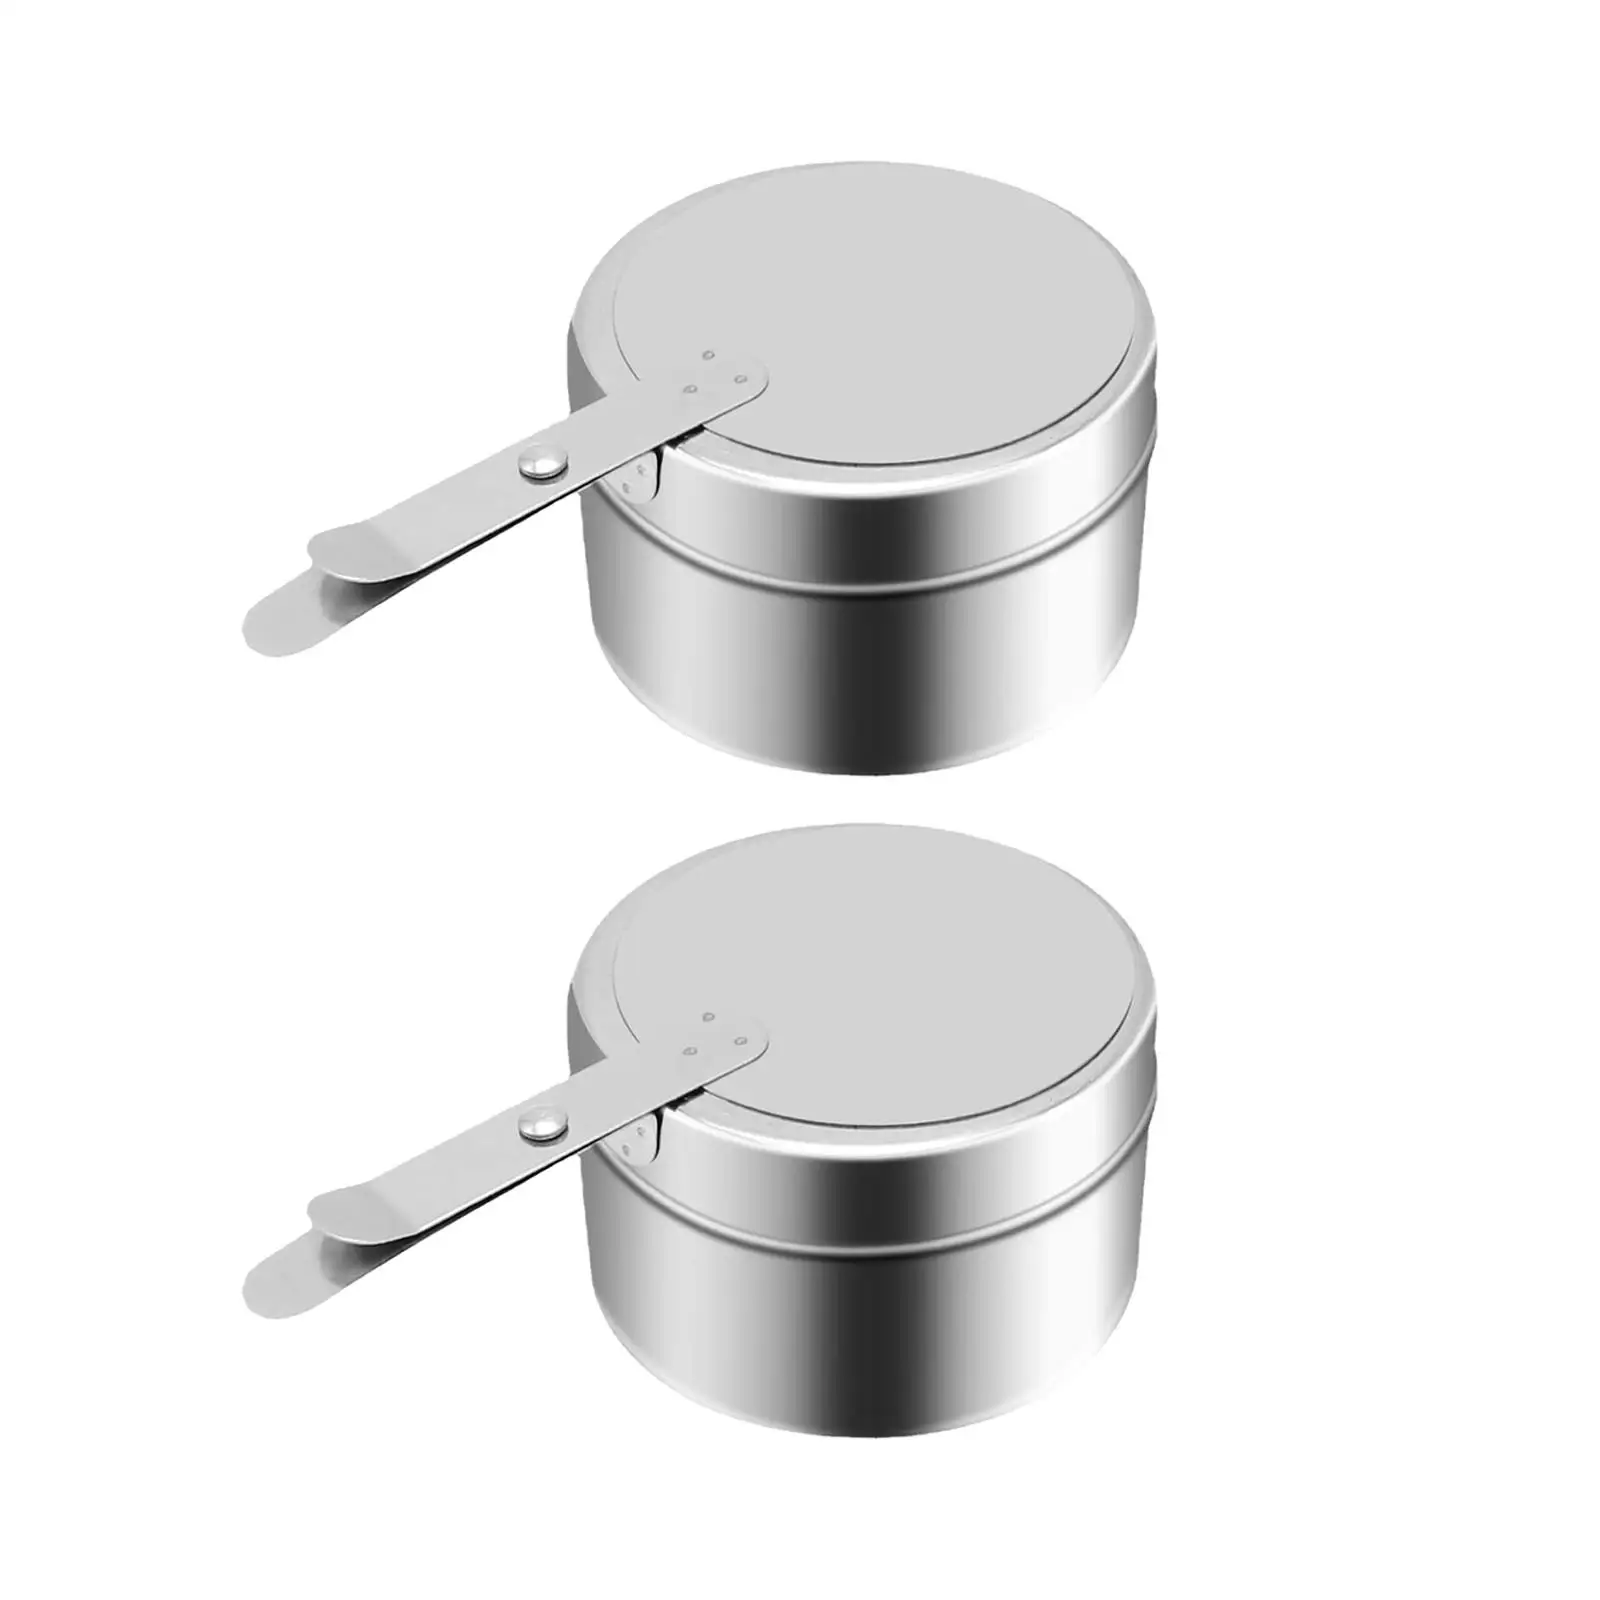 2Pcs Stainless Steel Fuels Holder with Cover, Chafer Wick Fuel Holder, Buffet Warmer Warming Trays for Buffets and Catering